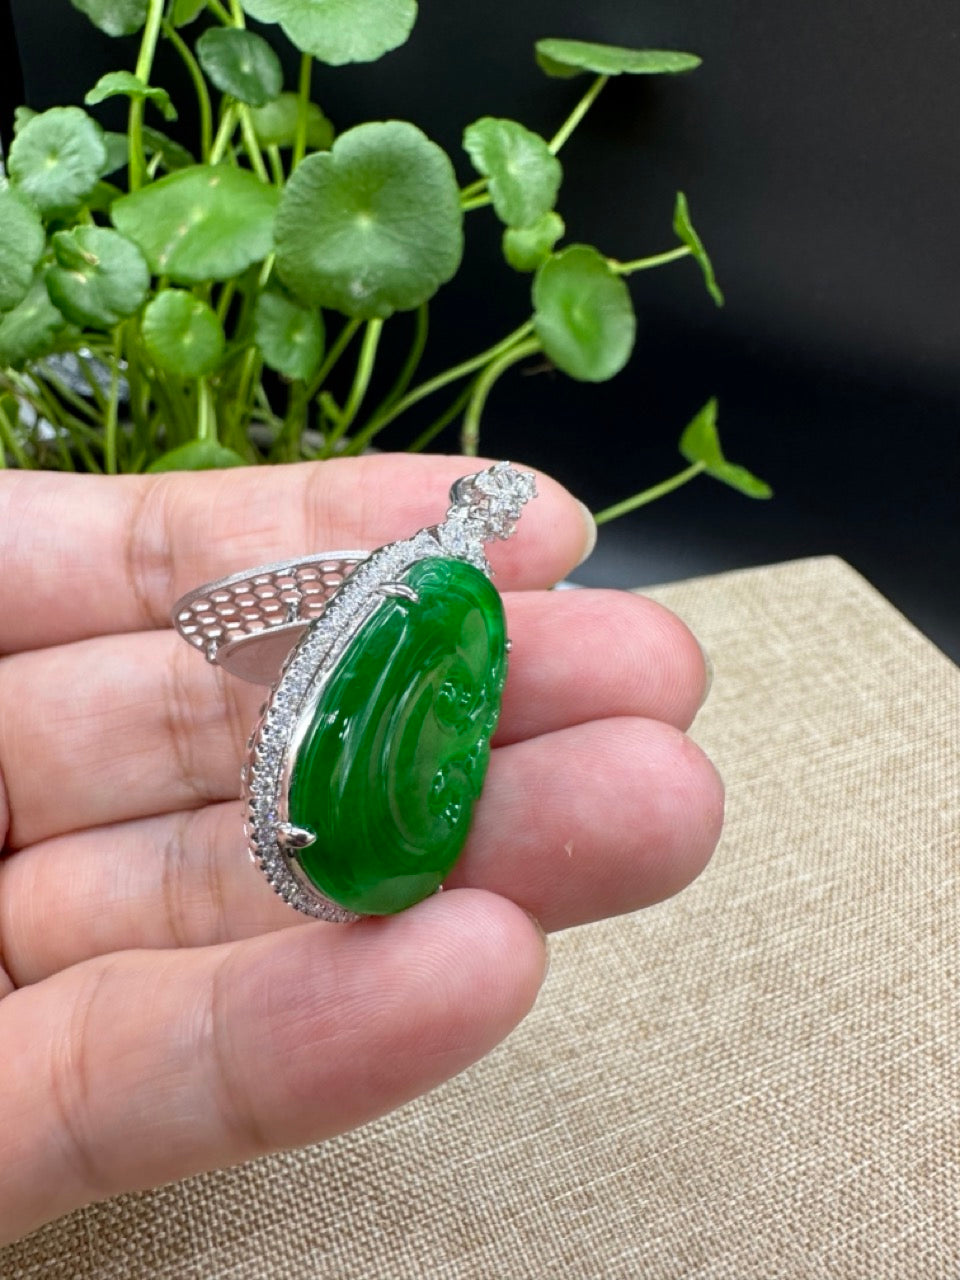 Amazon.com: Authentic Natural Canadian Jade, Nephrite Jade Pendant, Canada  Jade Ring, Mens Jade Necklace, Jade Necklace for Mens, Father's Day Gift. :  Handmade Products